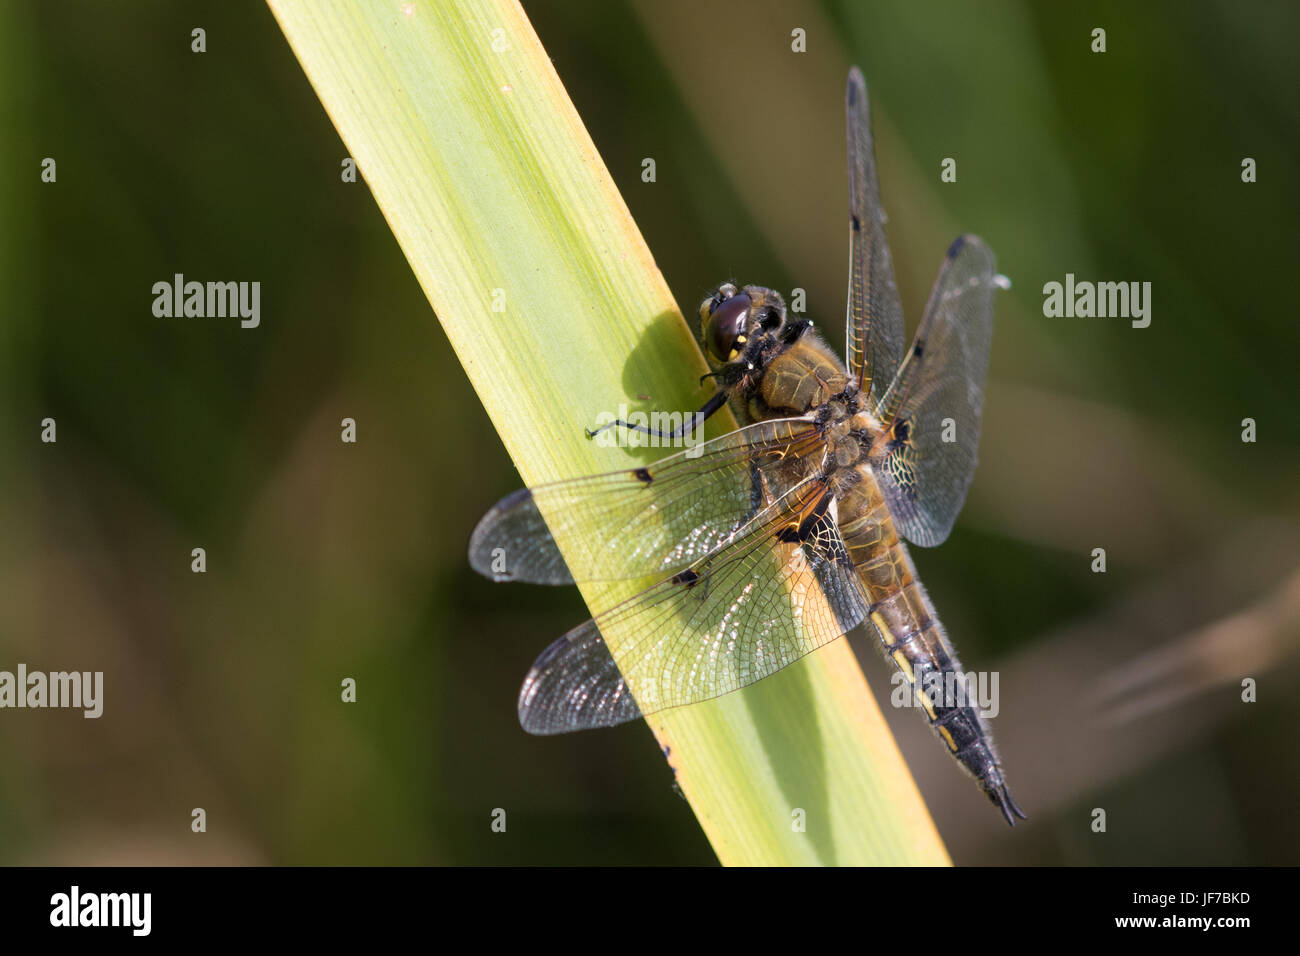 Four-spotted Chaser (Libellula quadrimaculata) dragonfly resting on a plant stem Stock Photo